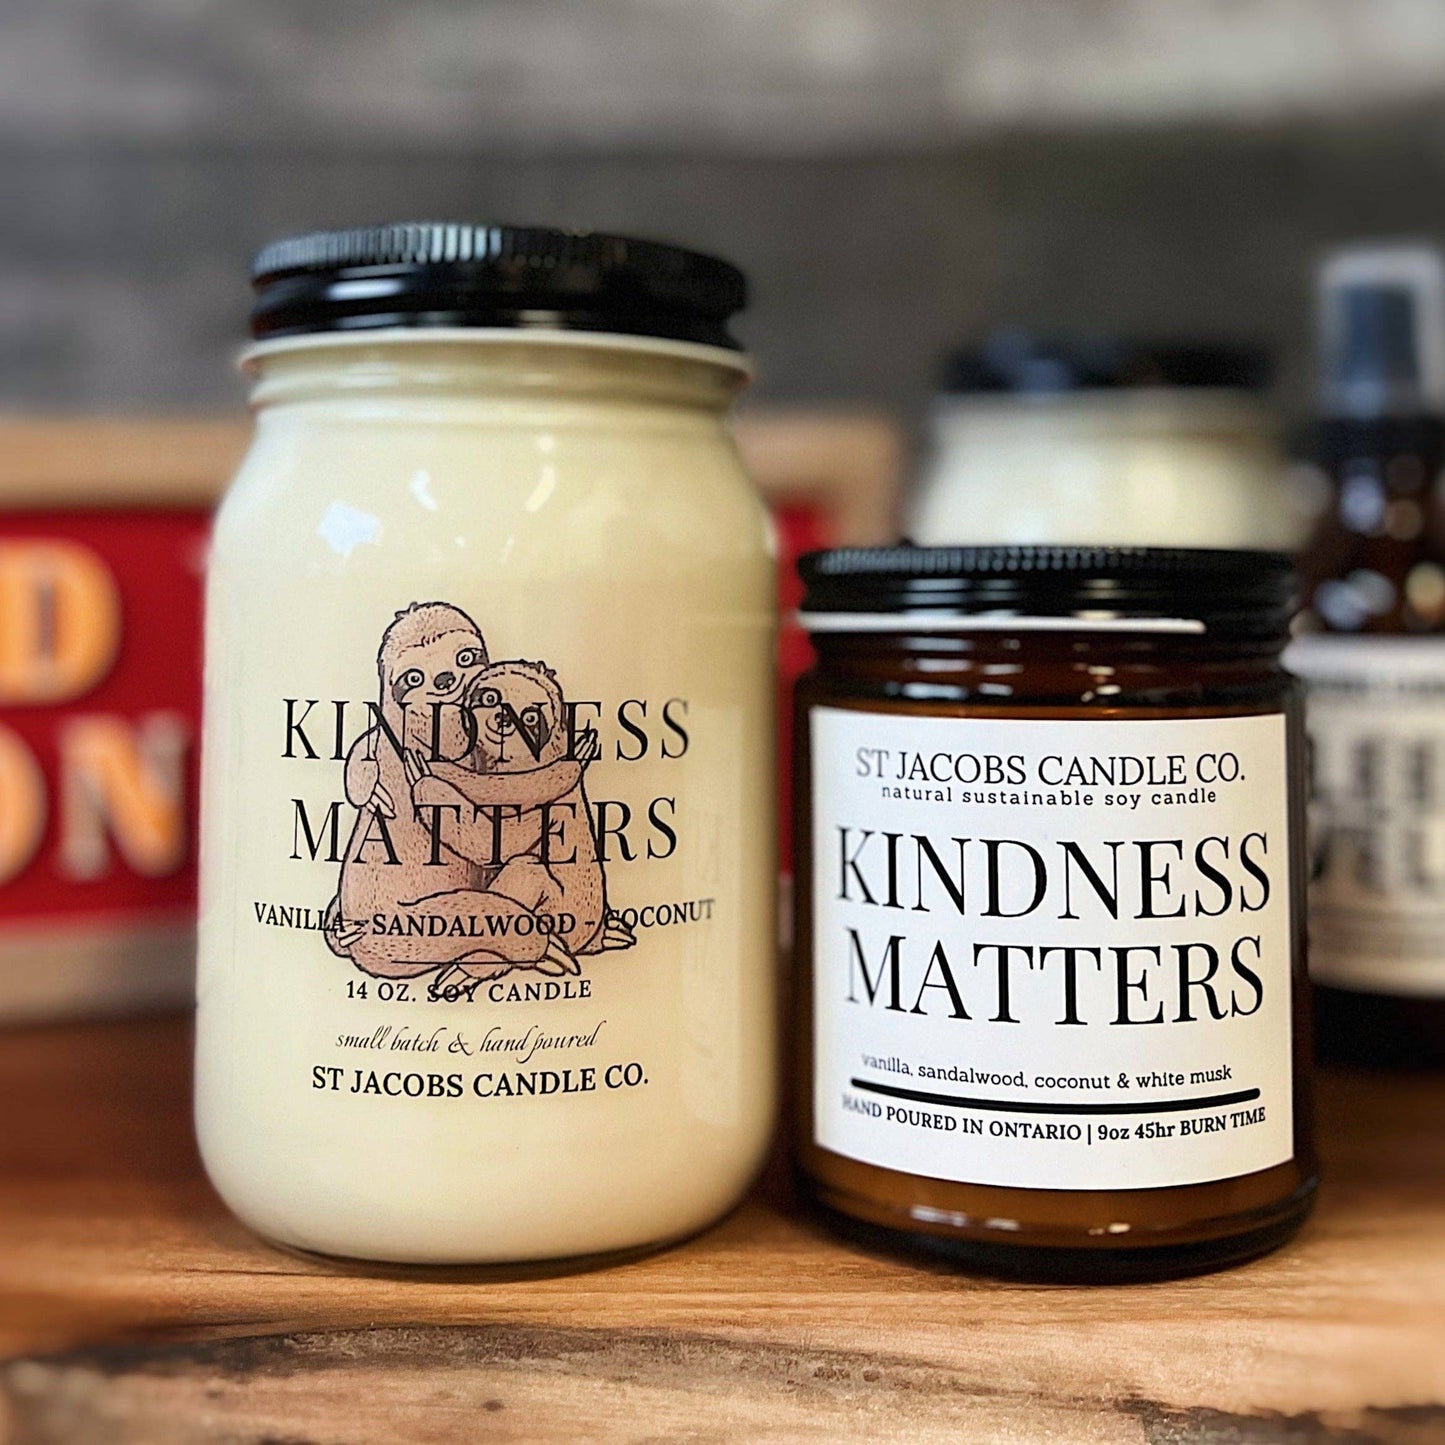 "KINDNESS MATTERS" Natural Soy Candle